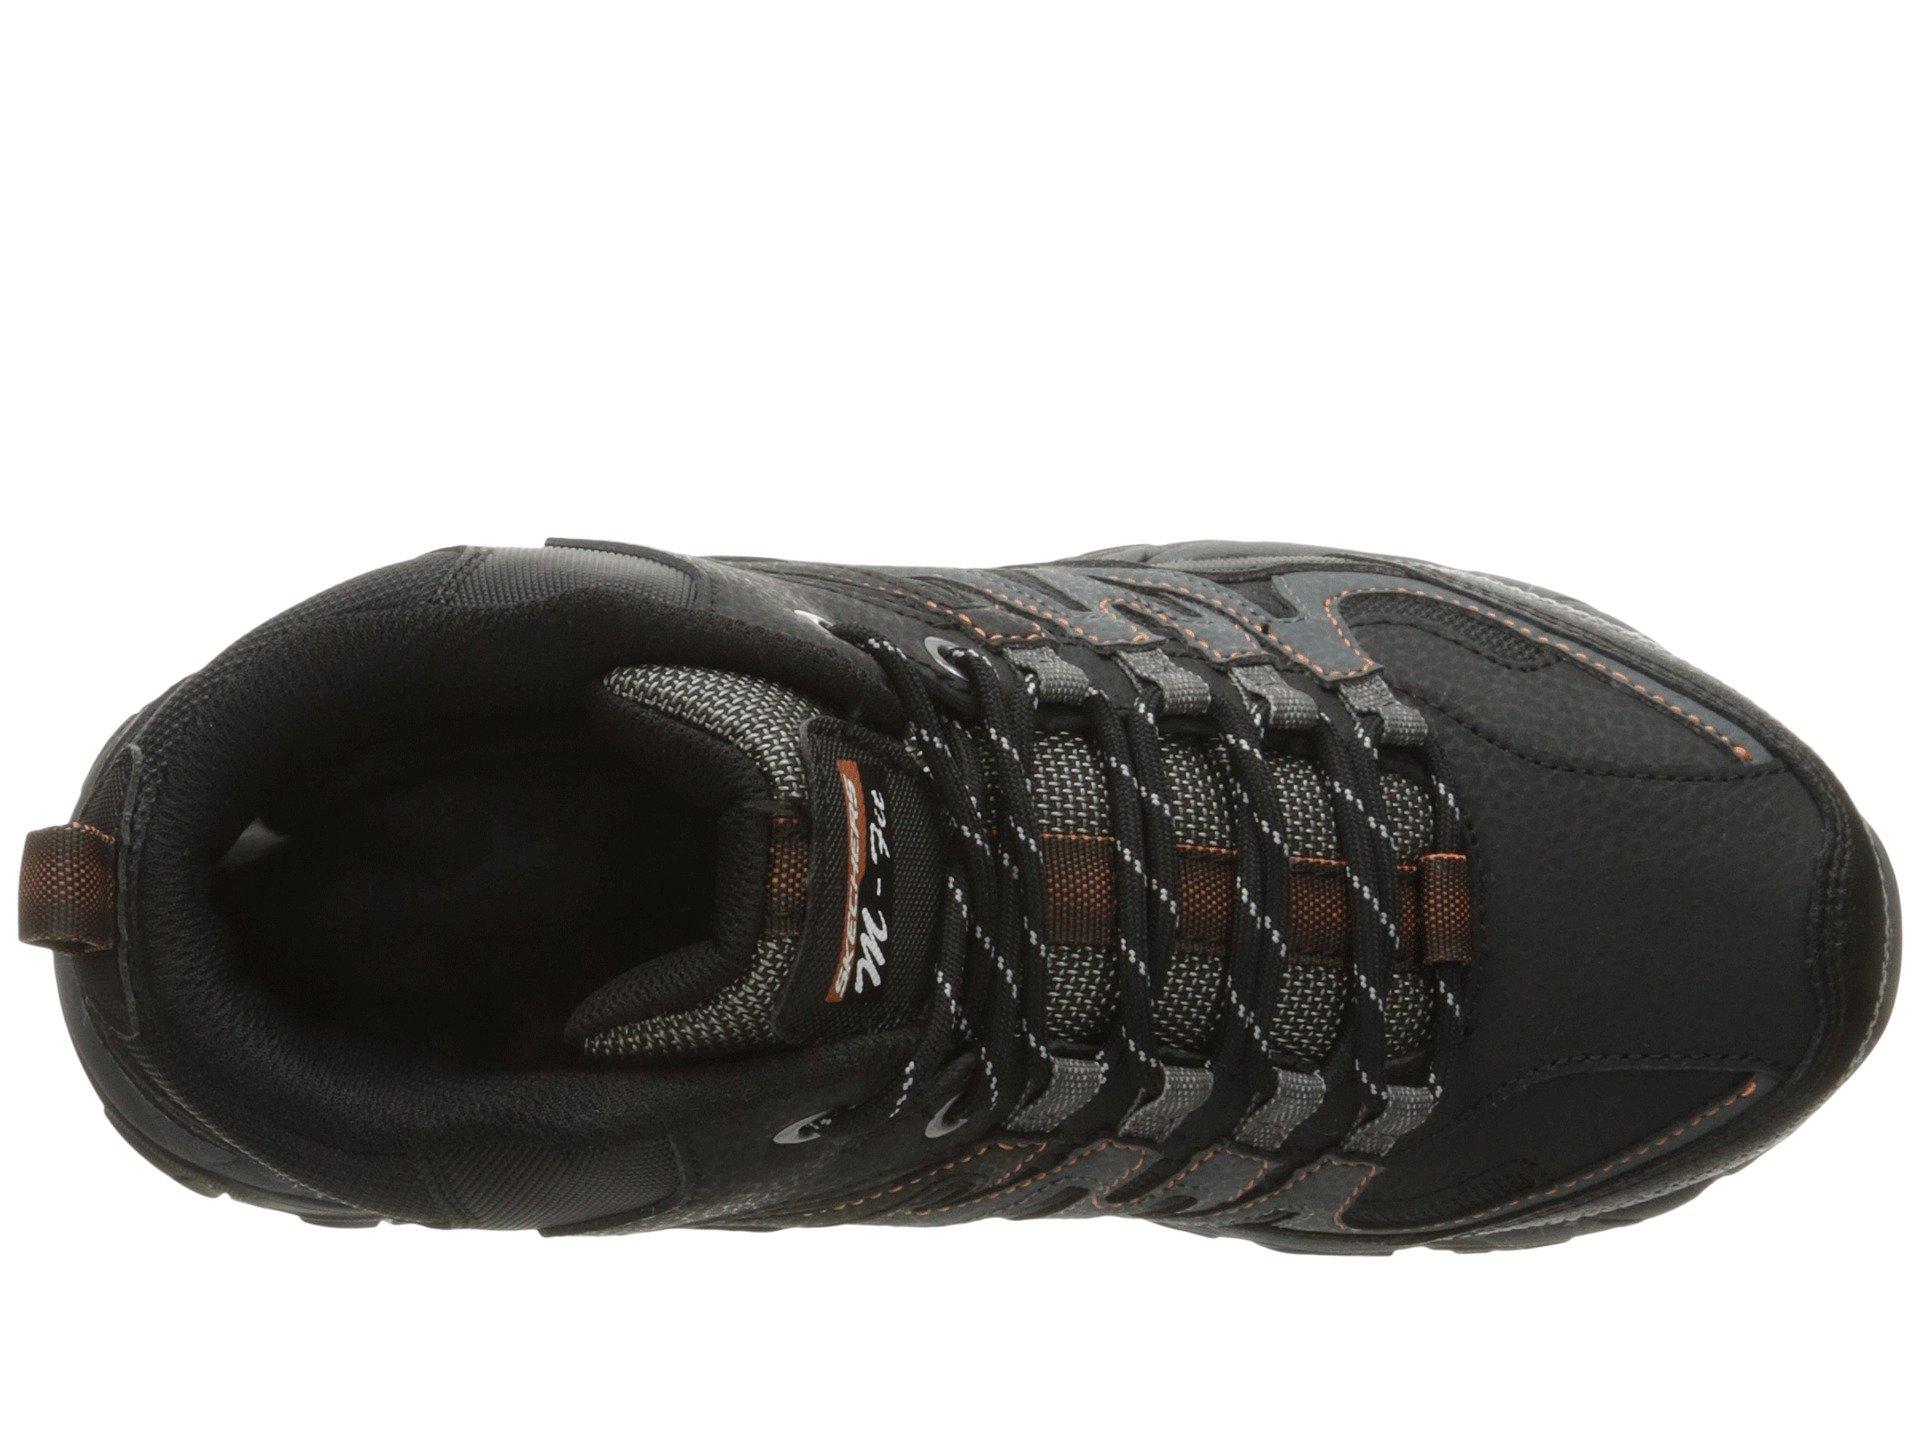 Skechers Leather Afterburn M. Fit Mid in Black for Men - Lyst